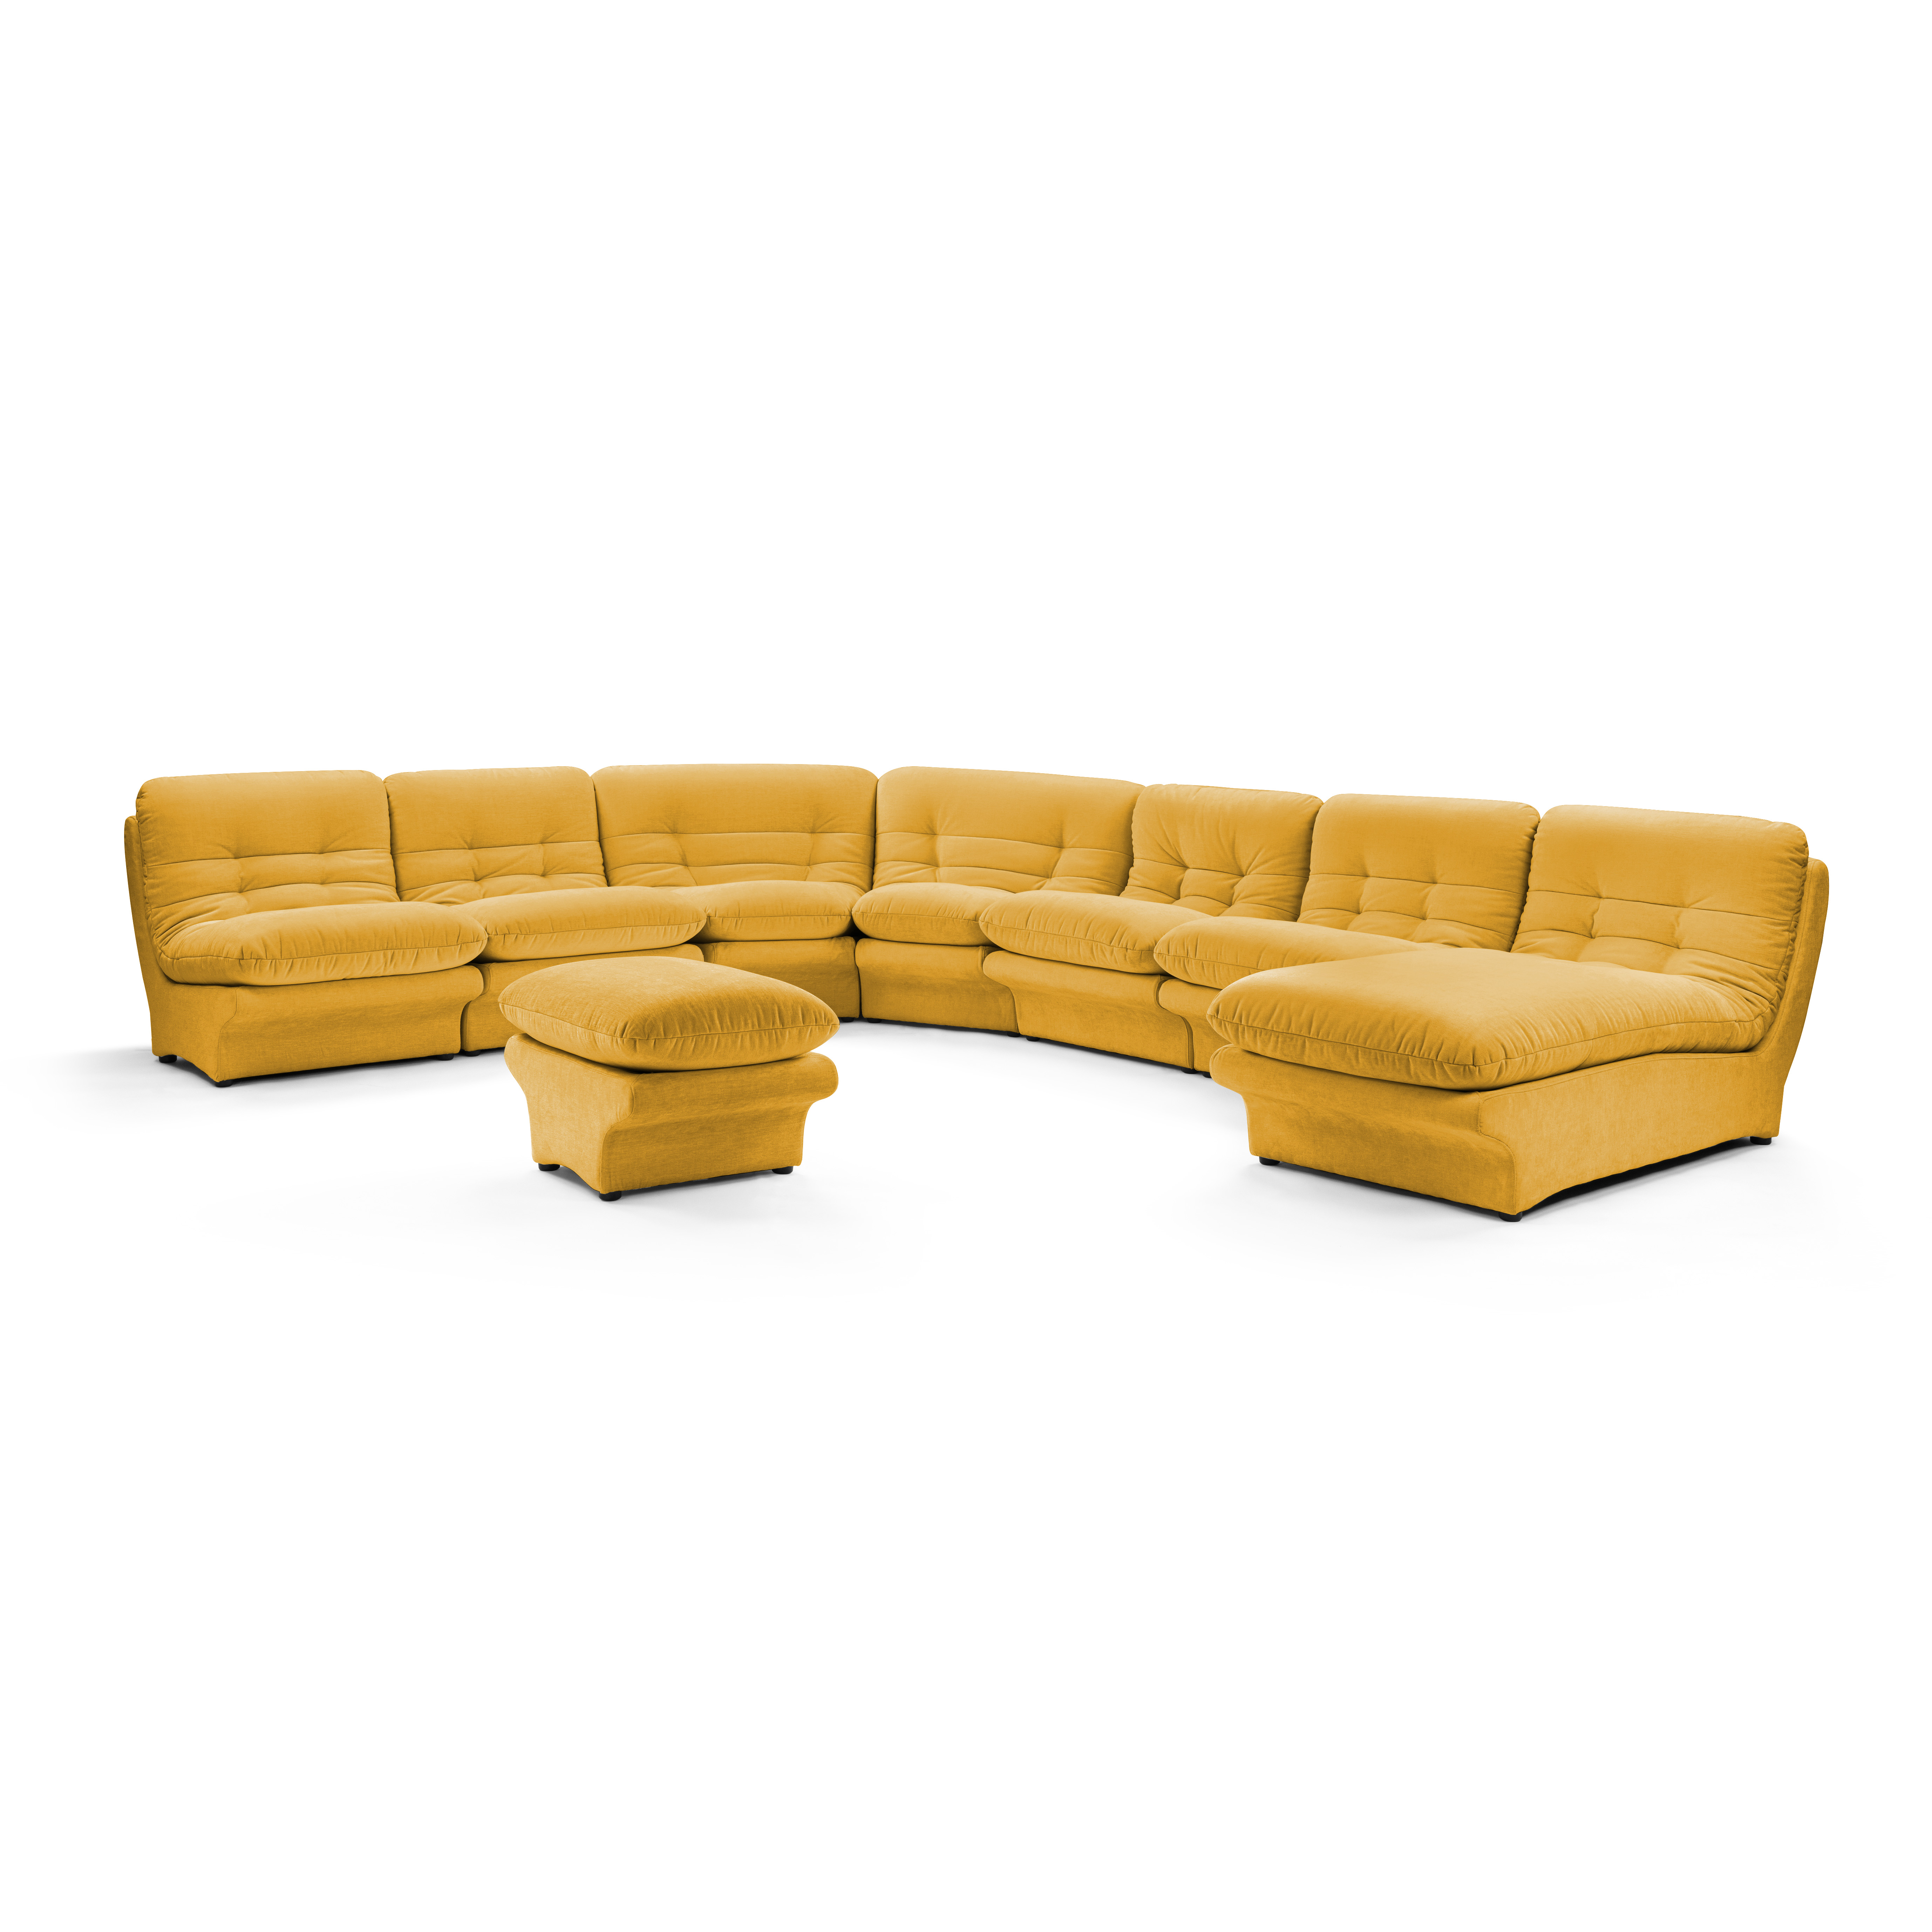 Carsons Mid Century Curved Modular Sectional Sofa / Combination 001-Chenille Helios-Mustard Yellow